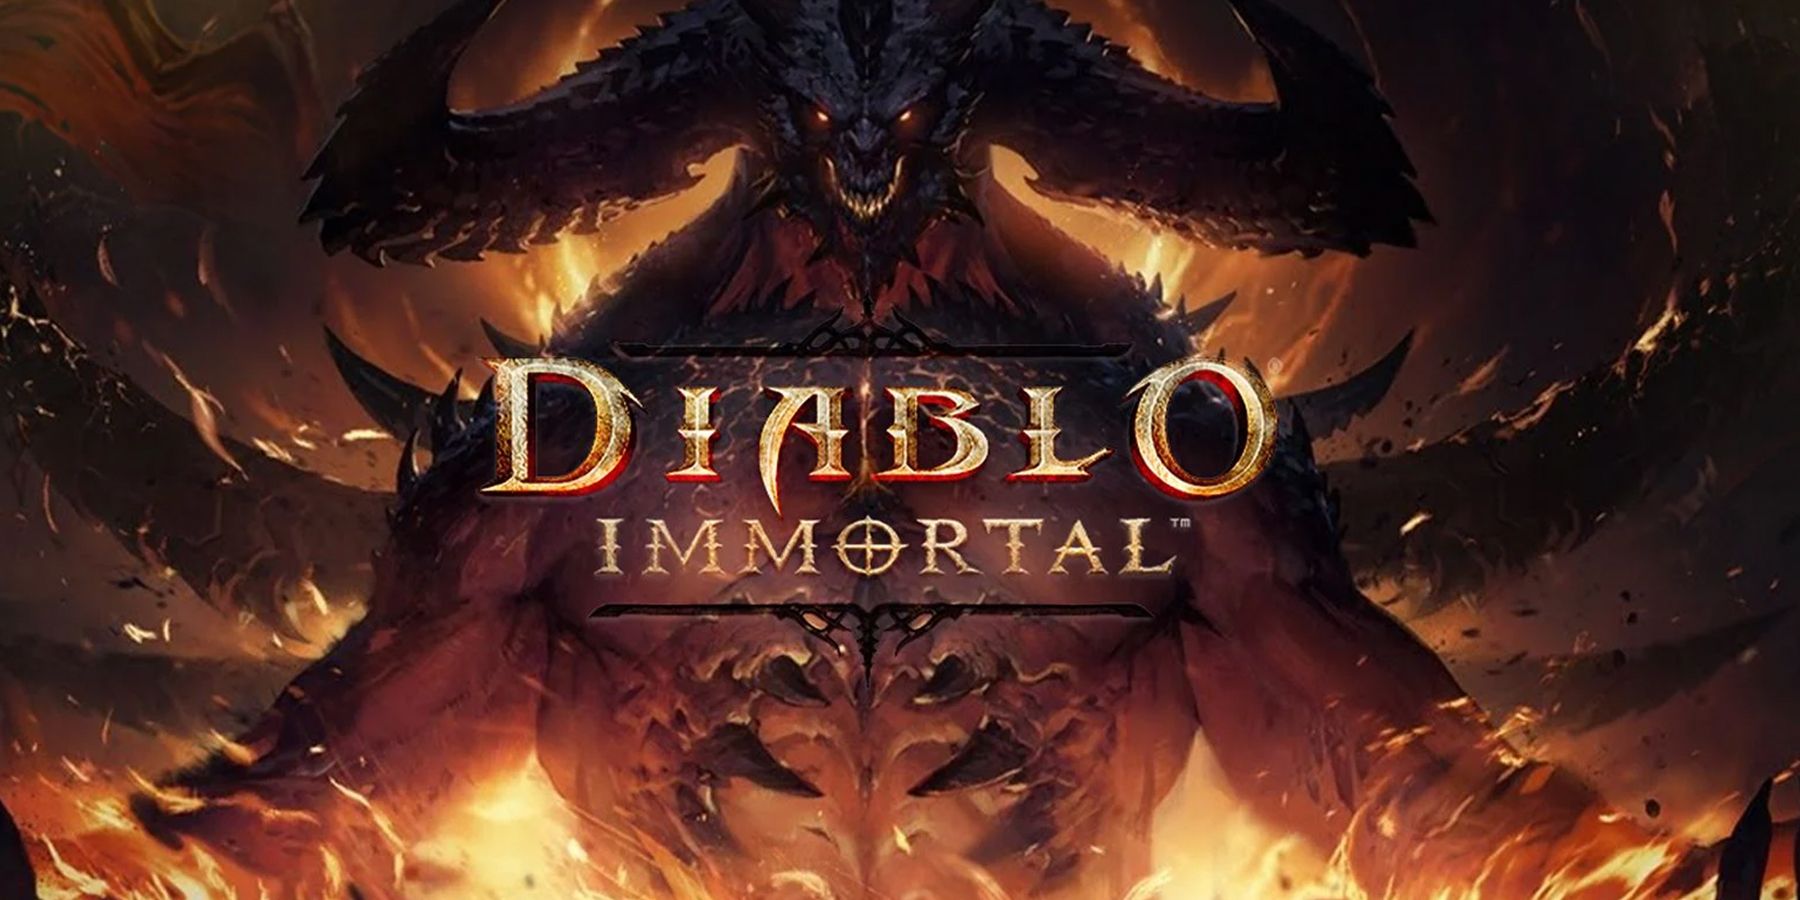 Diablo immortal player who has spent $100,000 on the game can no longer pvp  due to his resonance and MMR being too high. : r/Diablo